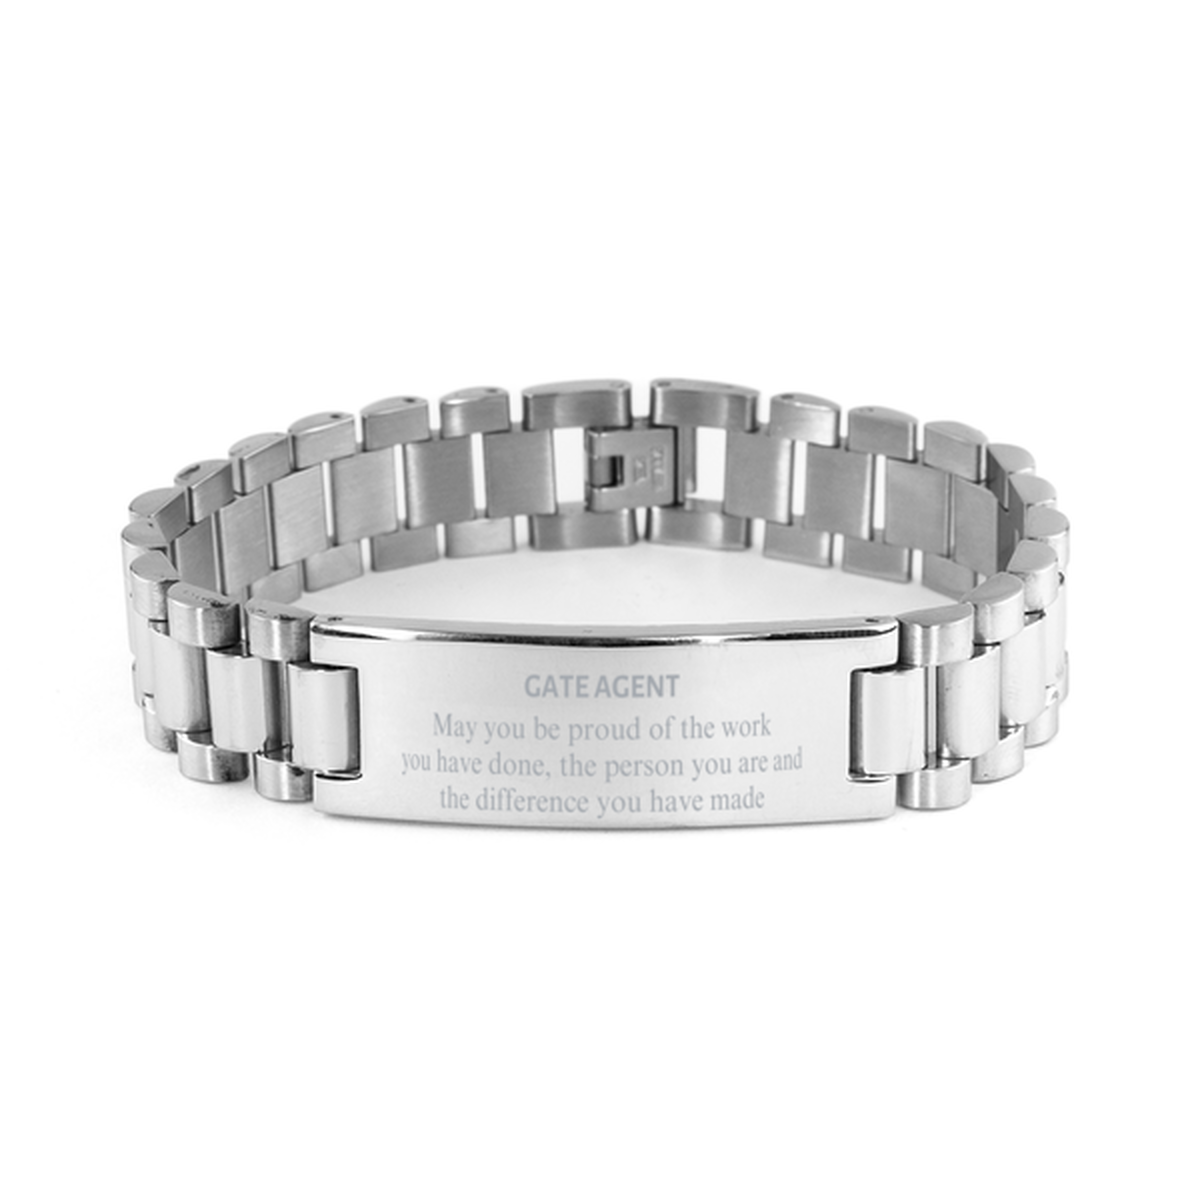 Gate Agent May you be proud of the work you have done, Retirement Gate Agent Ladder Stainless Steel Bracelet for Colleague Appreciation Gifts Amazing for Gate Agent